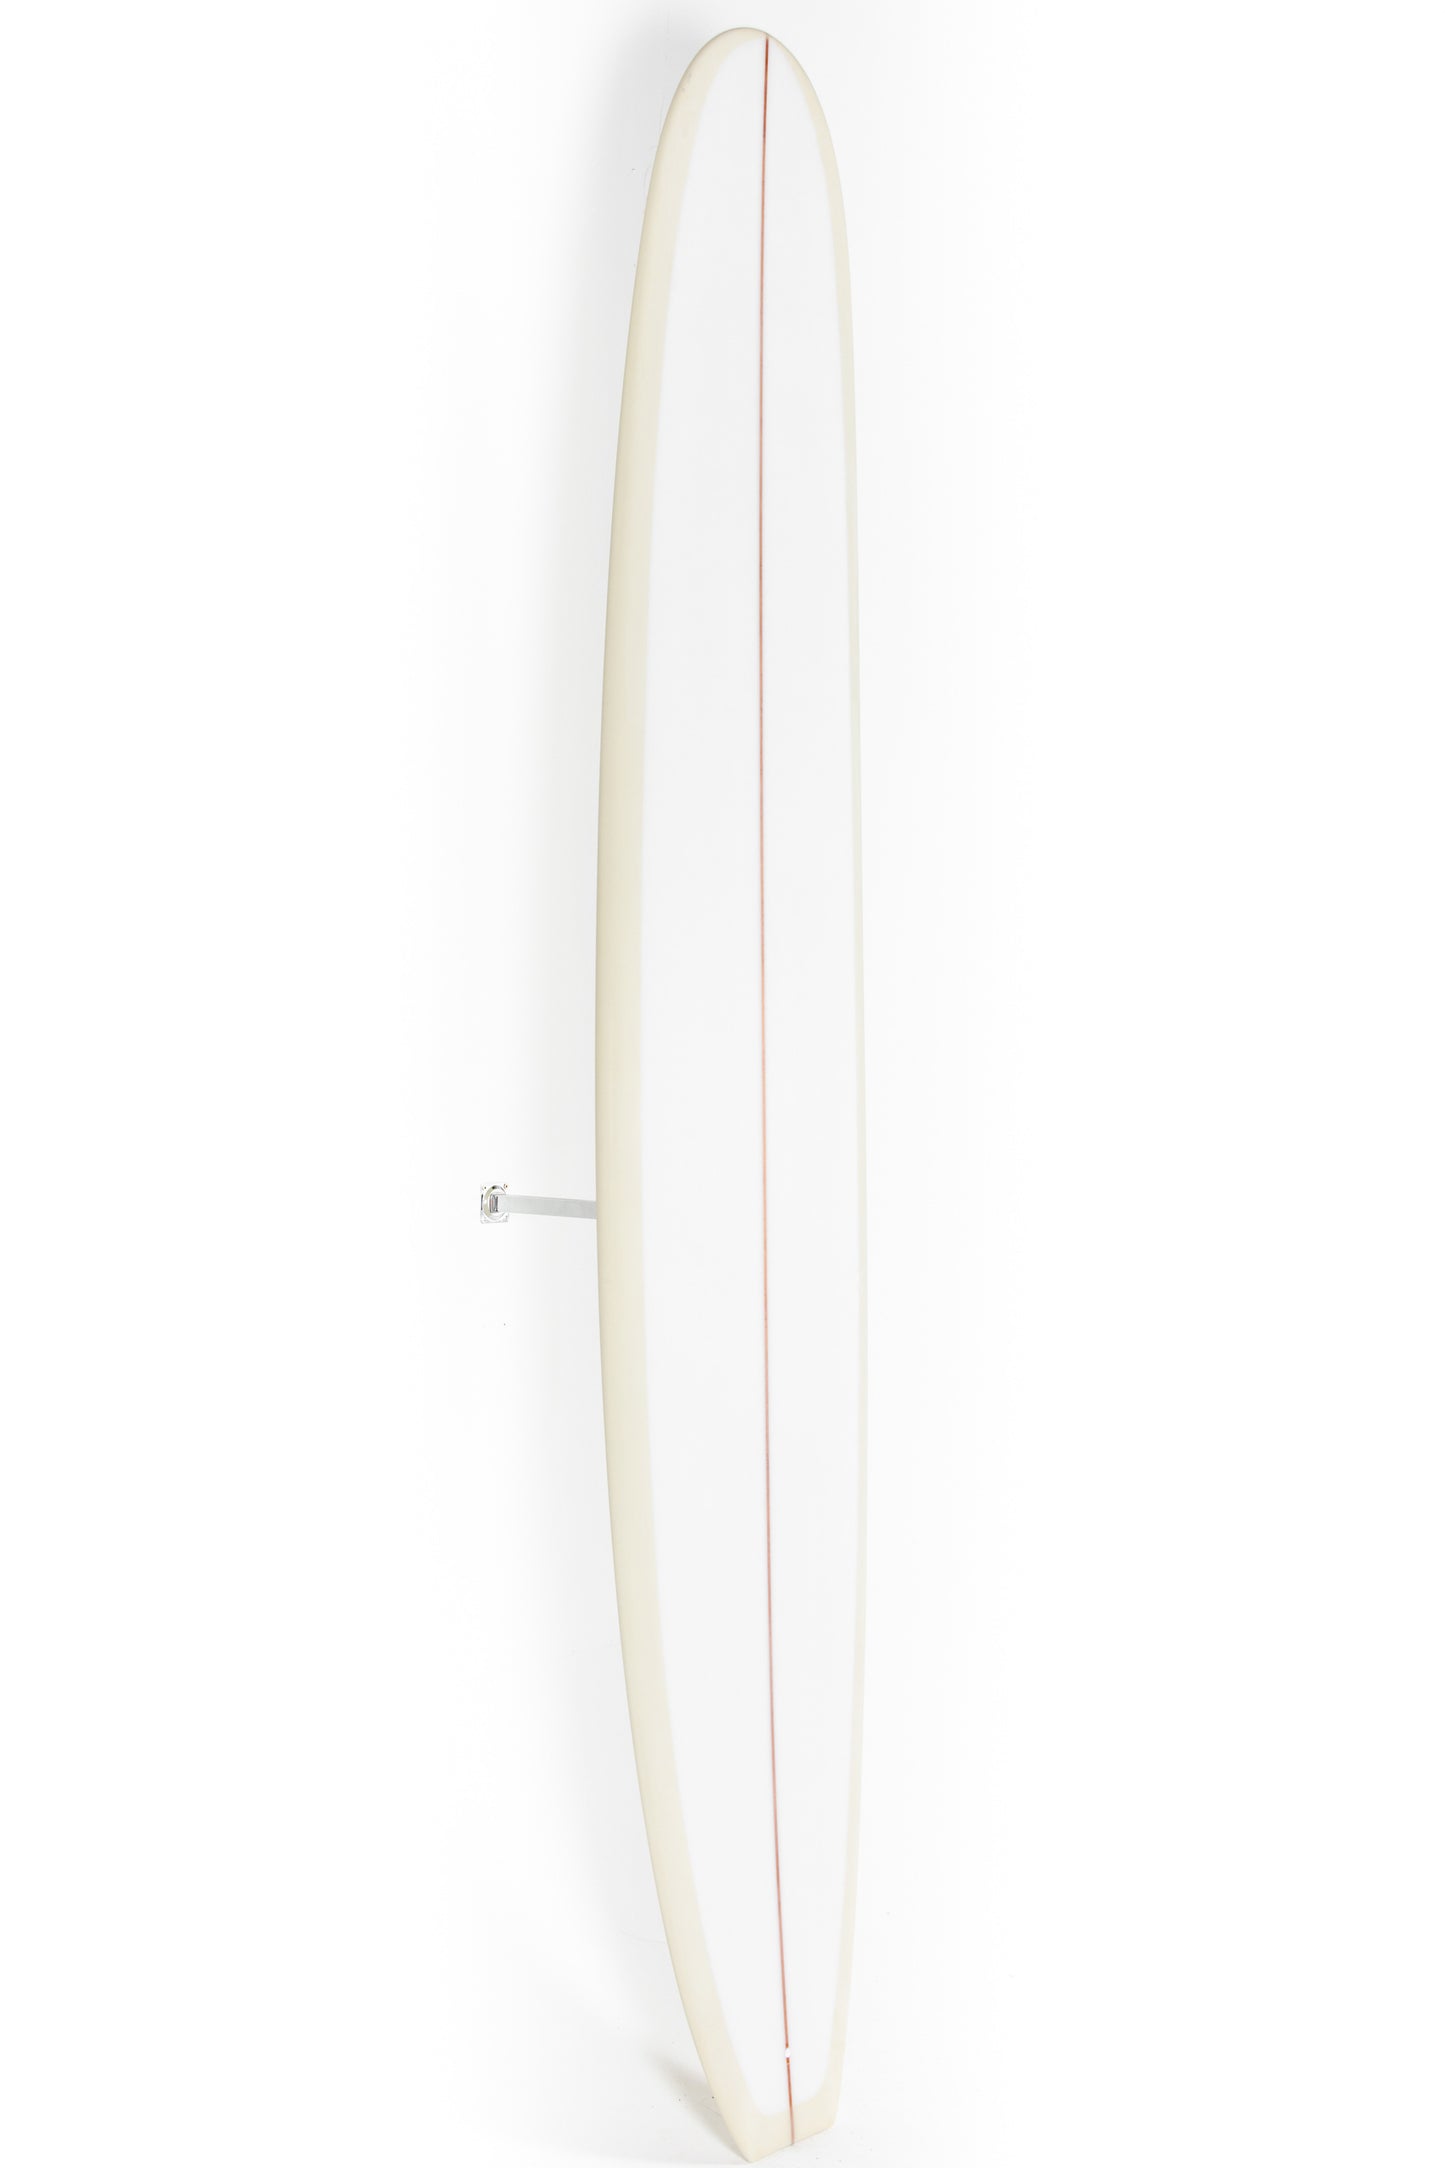 
                  
                    Pukas Surf Shop - Thomas Surfboards - SCOOP TAIL NOSERIDER - 9'6" x 23 1/16 x 3 1 /16 x 77.2L - SCOOP96
                  
                